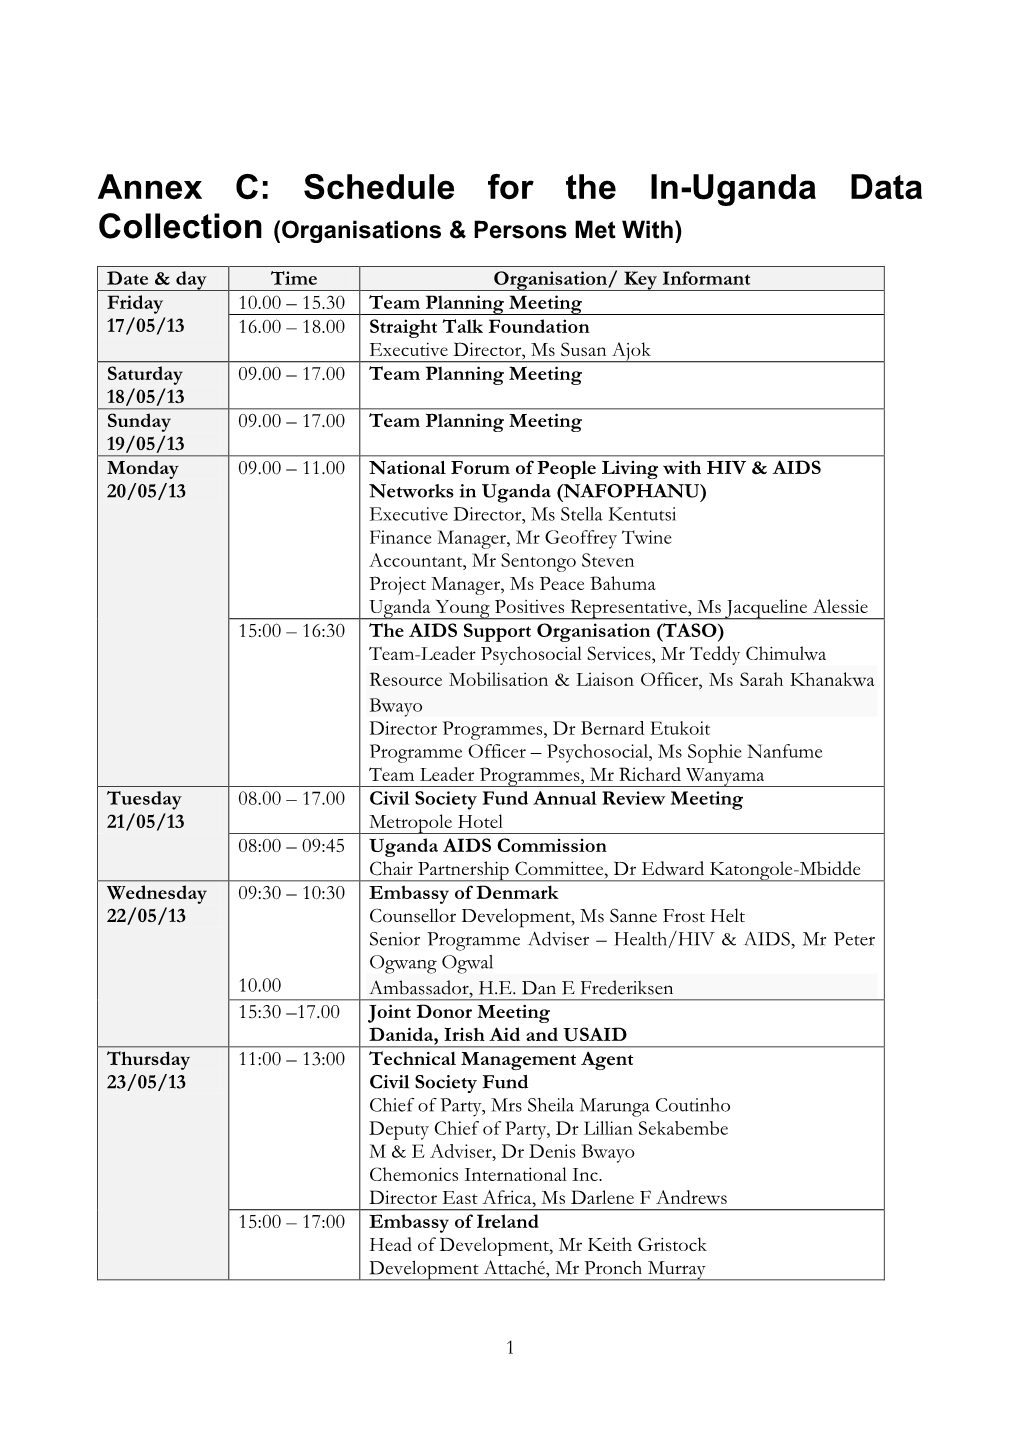 Annex C: Schedule for the In-Uganda Data Collection (Organisations & Persons Met With)